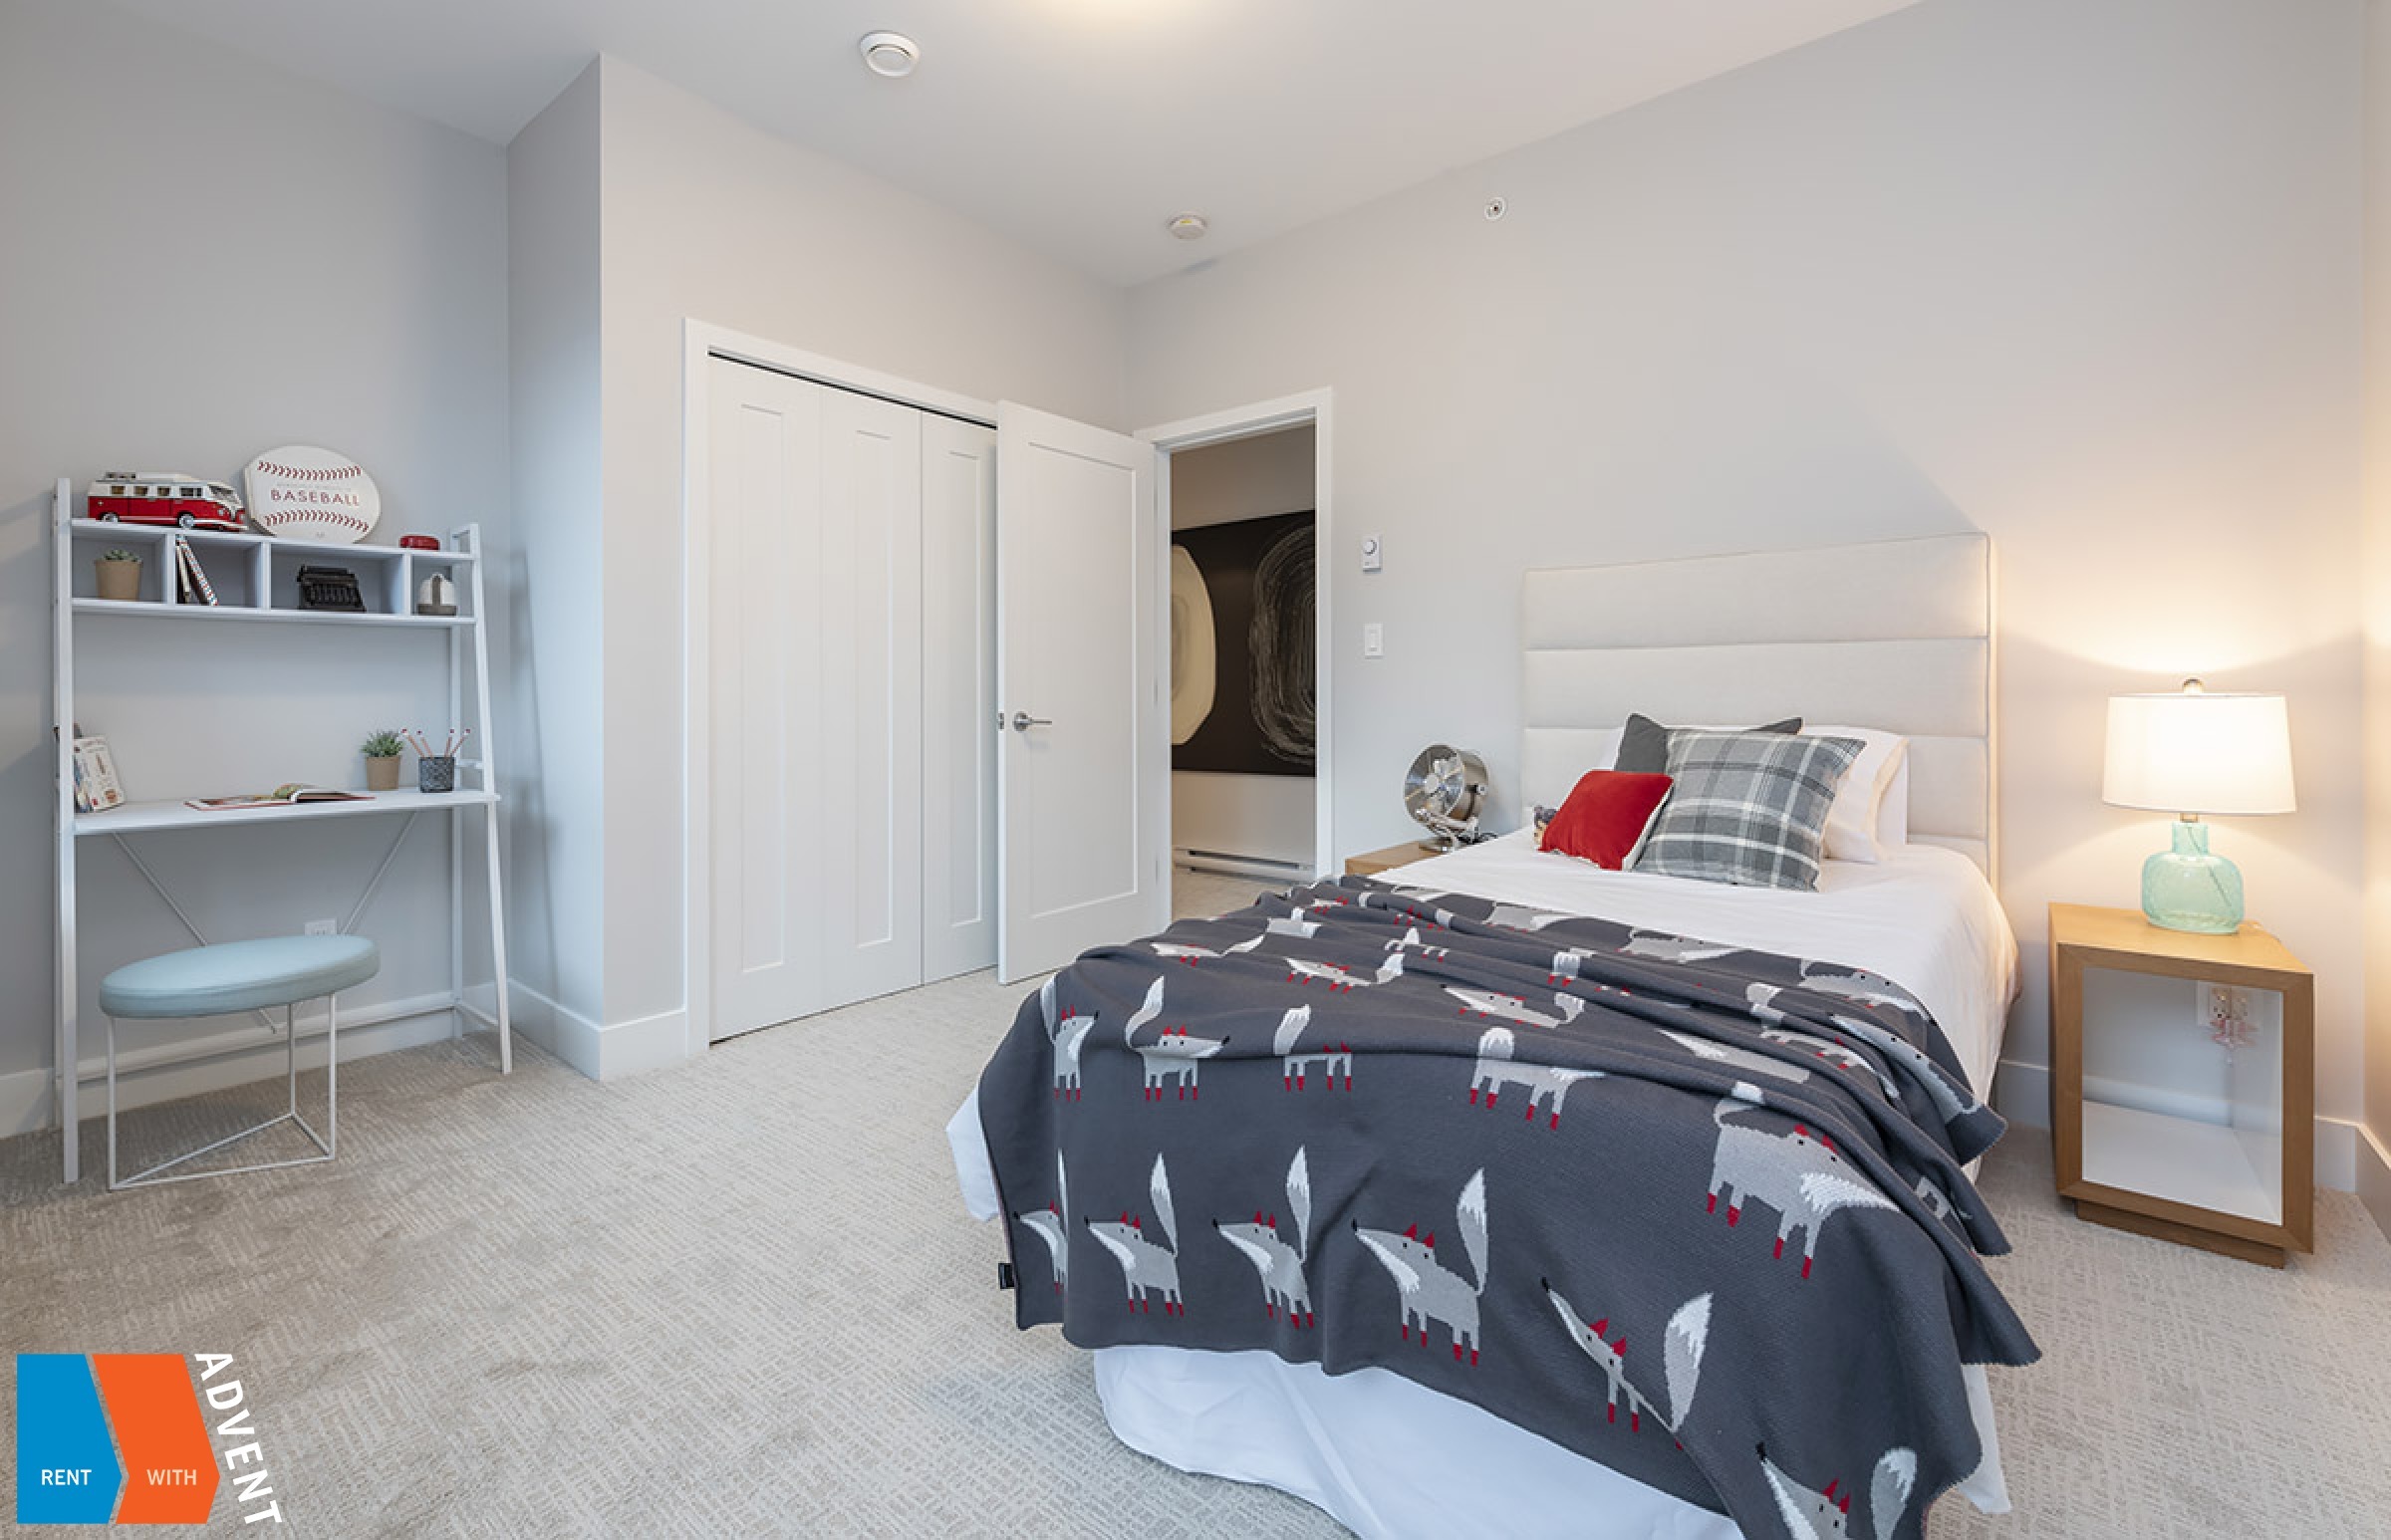 UNIT D: Brand New 2 Level 3 Bed 2 Bath Townhouse Rentals at The Post in Ladner, Delta. The Post (Unit D) 4771 54A Street, Ladner, BC, Canada.